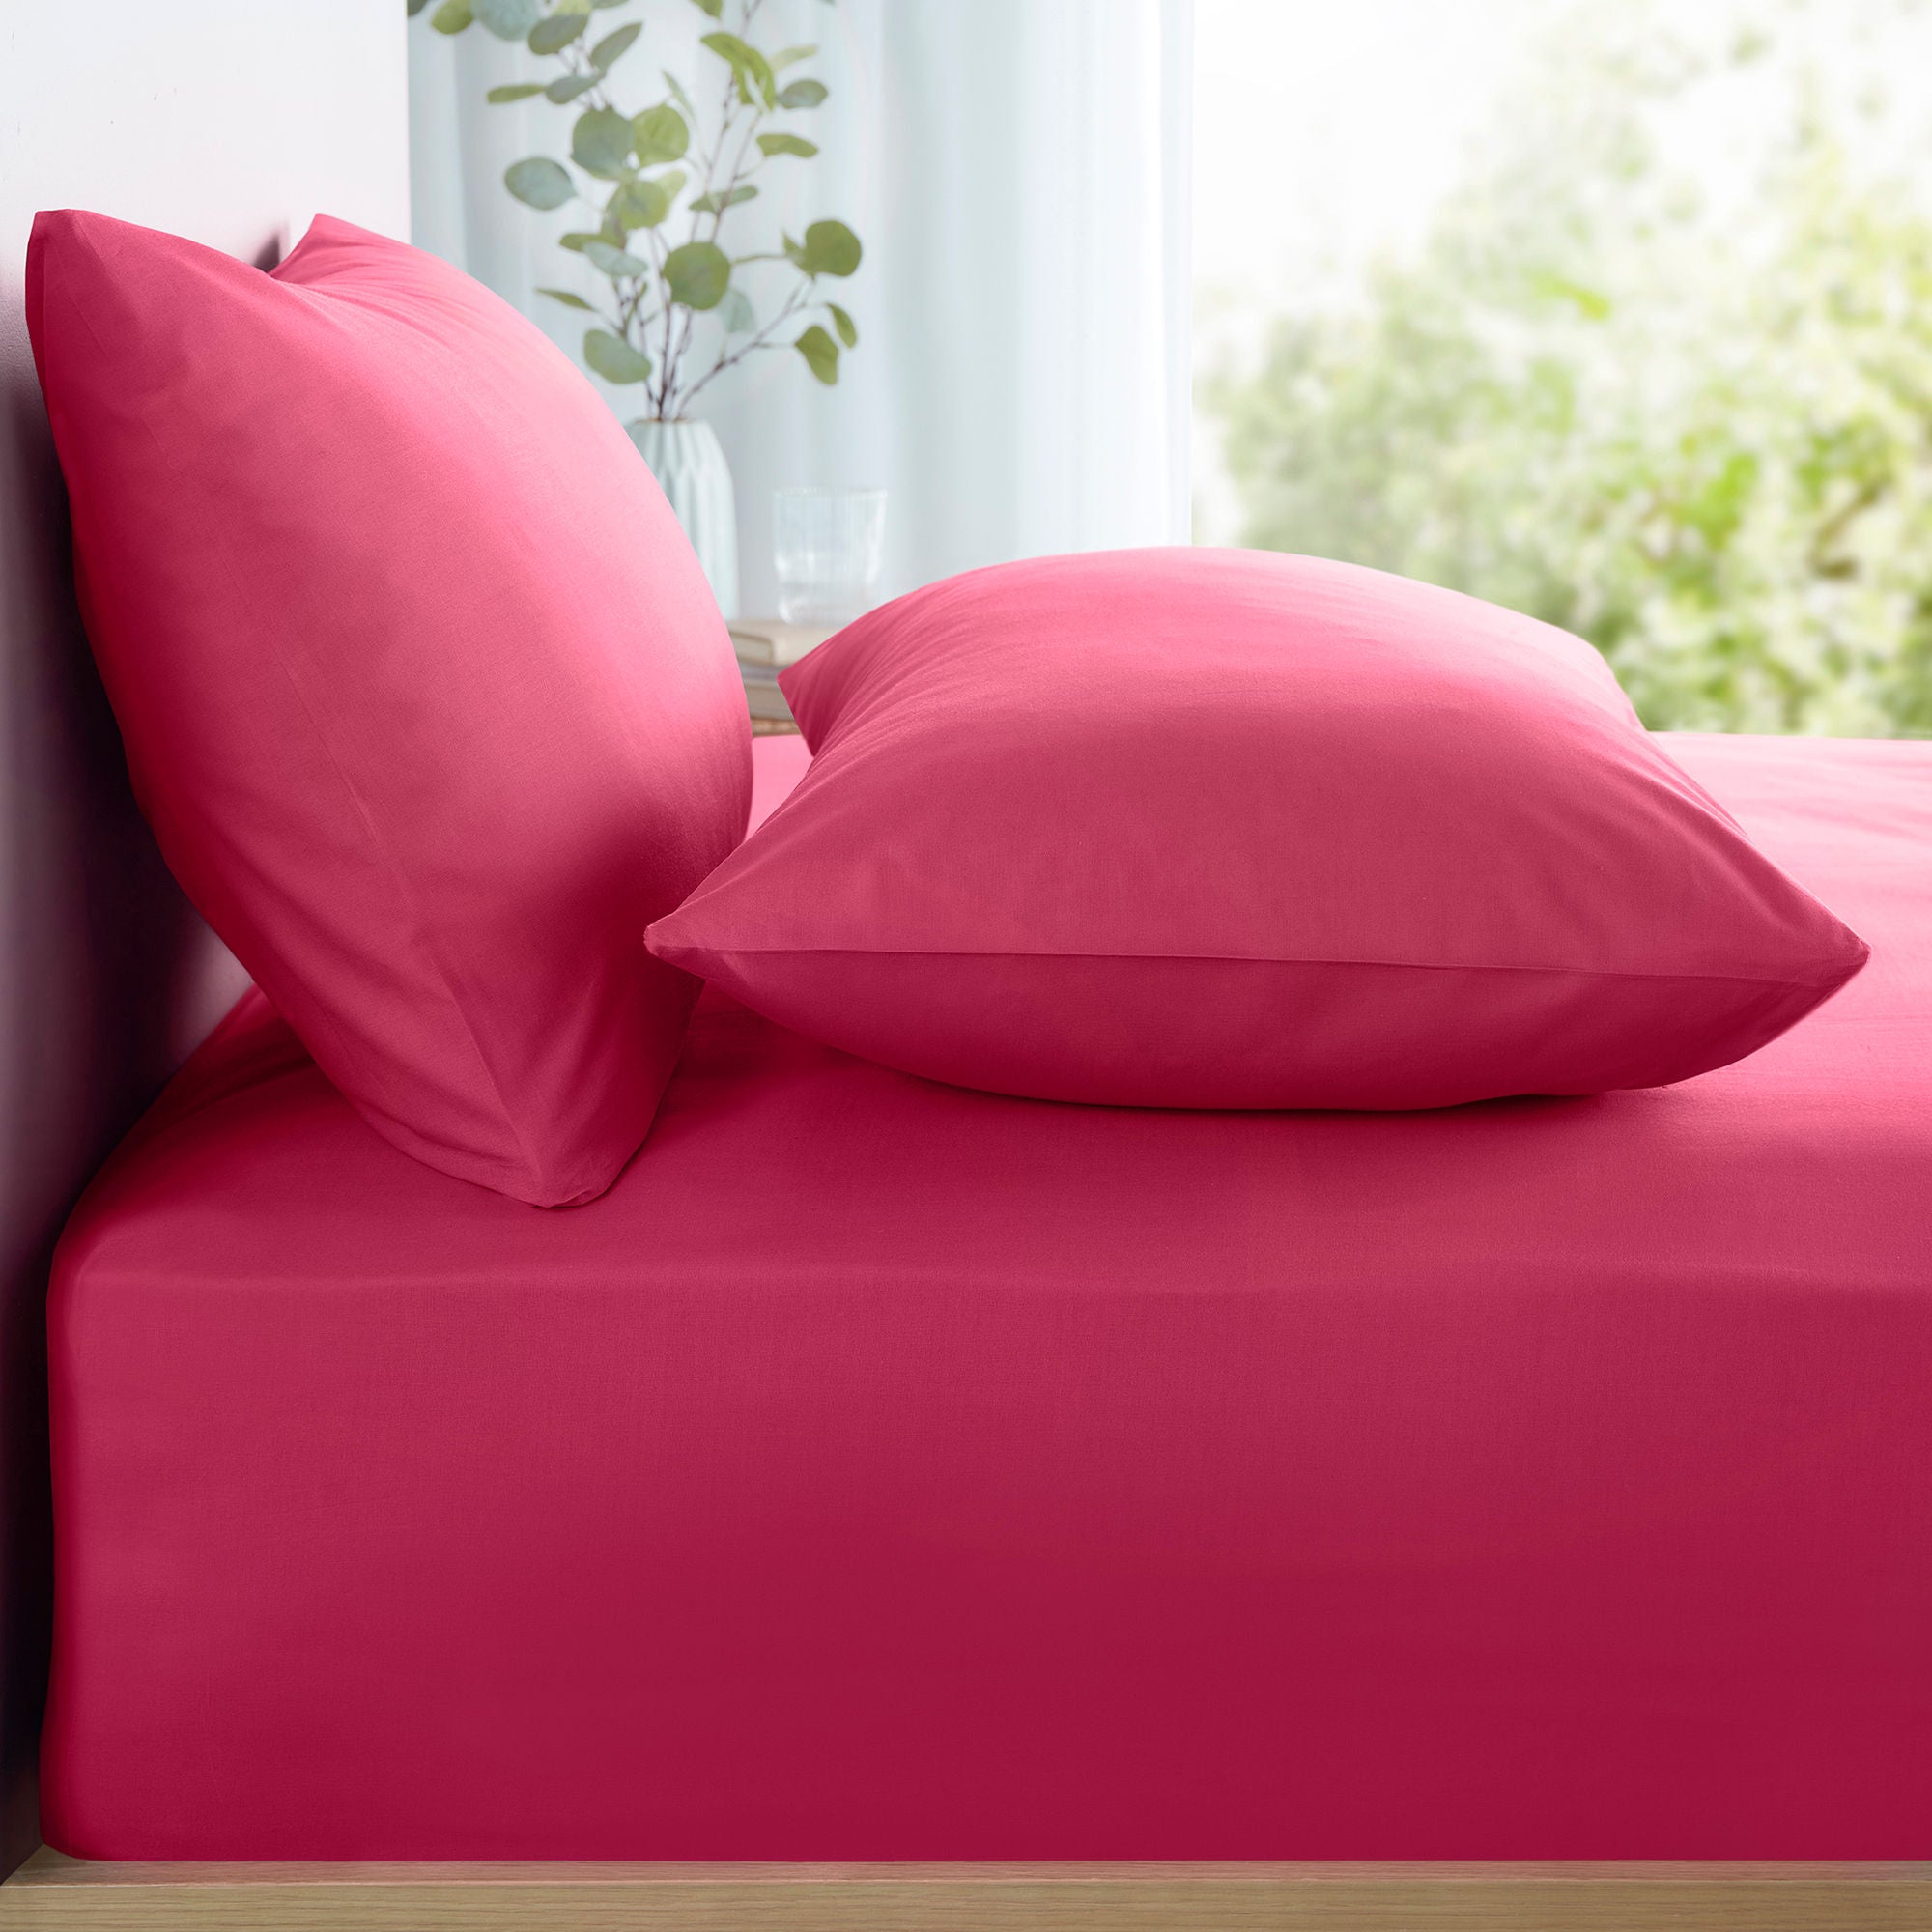 Appletree Pure Cotton 28cm Fitted Bed Sheet by Appletree Style in Pink - 28cm Fitted Bed Sheet - Appletree Style